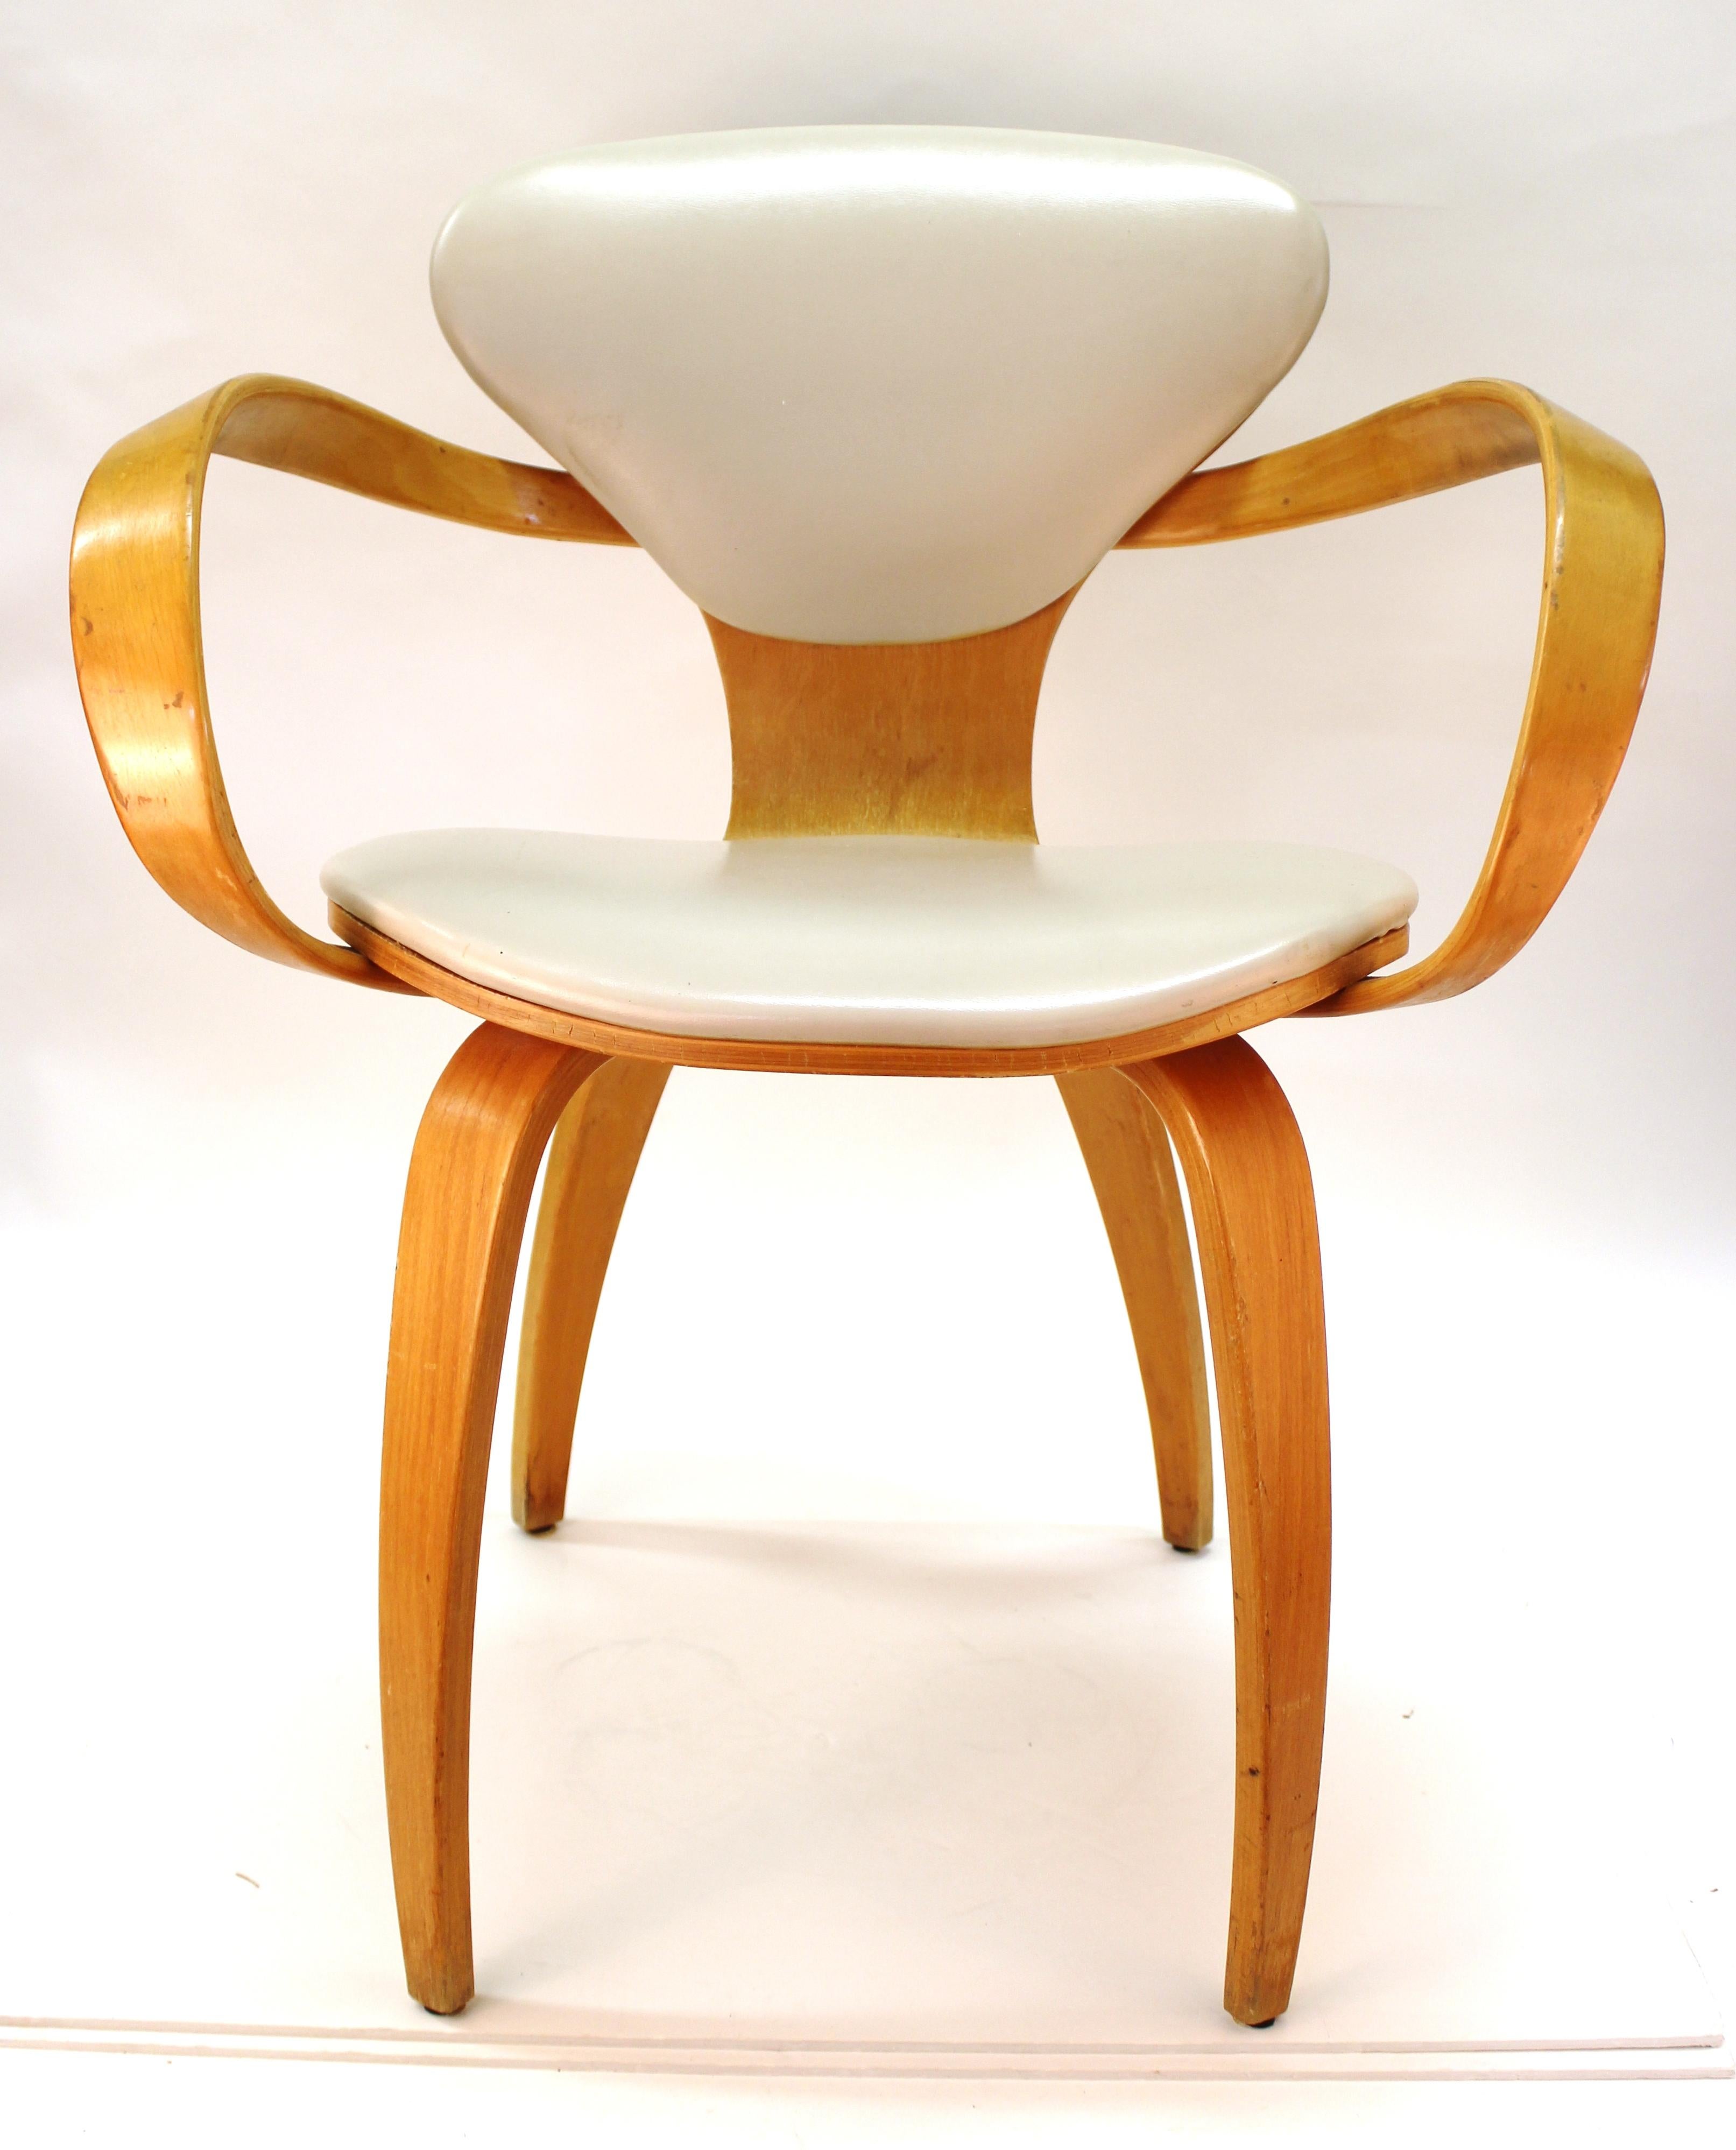 Mid-Century Modern set of six iconic dining room chairs designed by Norman Cherner for Plycraft during the 1960s. This set comprises four chairs with armrests and two chairs without armrests. The set is in great vintage condition, with some wear to